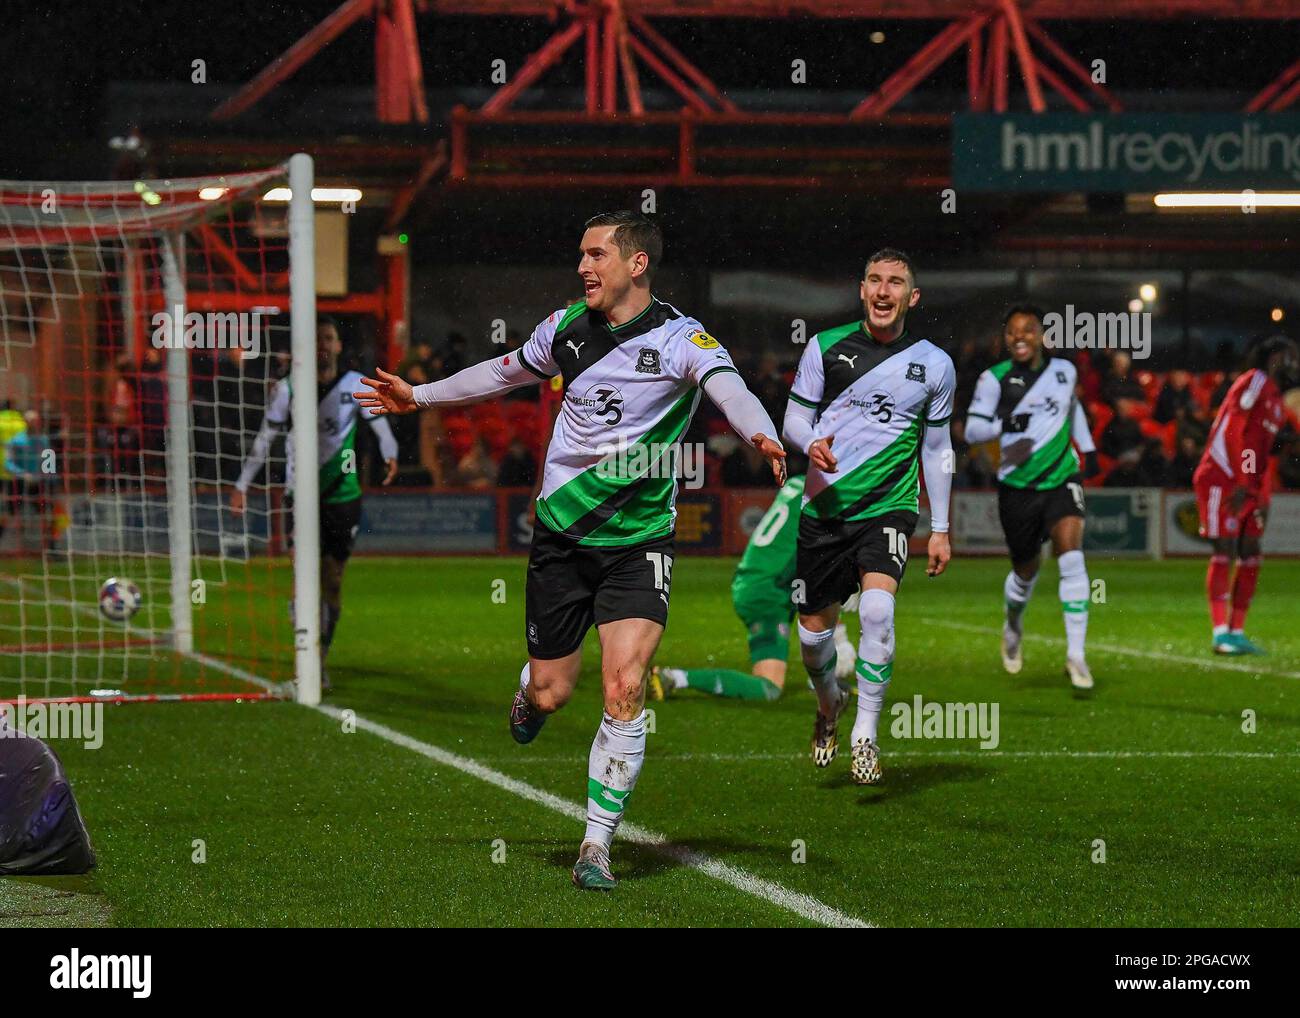 Conor Grant #15 of Plymouth Argyle scores to make it 0-2 during the Sky Bet League 1 match Accrington Stanley vs Plymouth Argyle at Wham Stadium, Accrington, United Kingdom, 21st March 2023  (Photo by Stan Kasala/News Images) Stock Photo